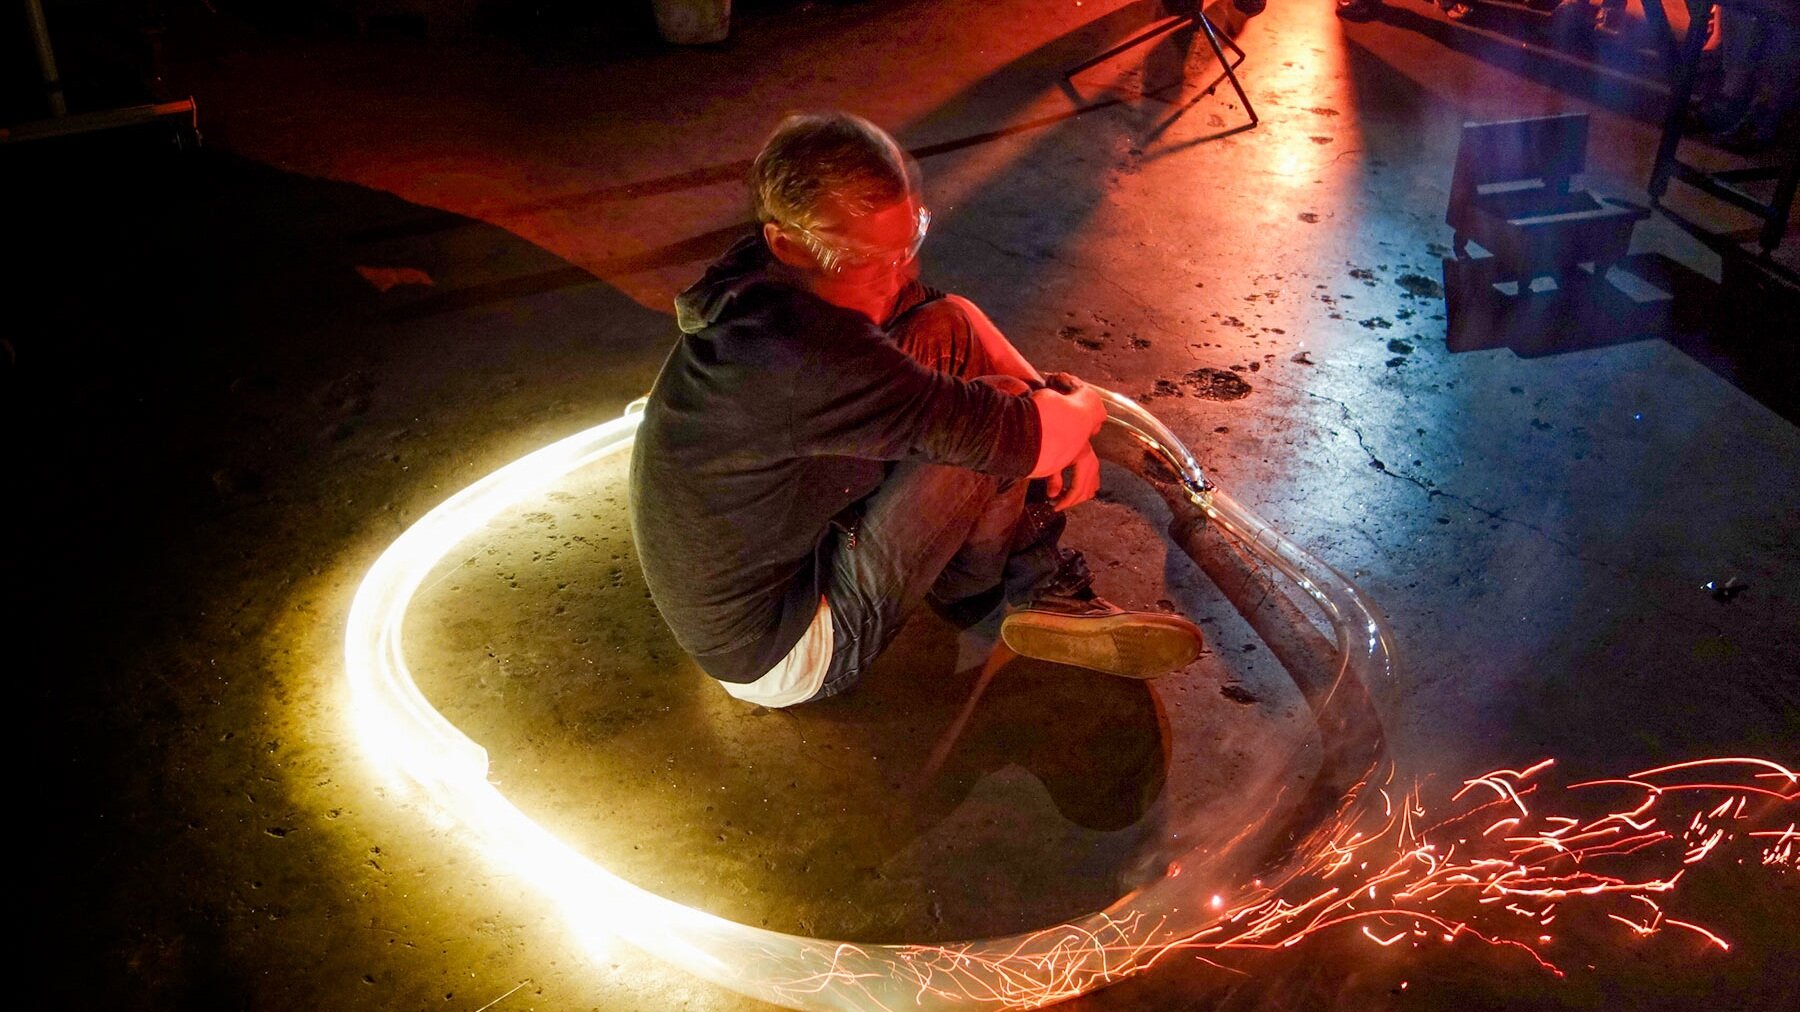 A man sits inside a ring of glowing glass and sparks